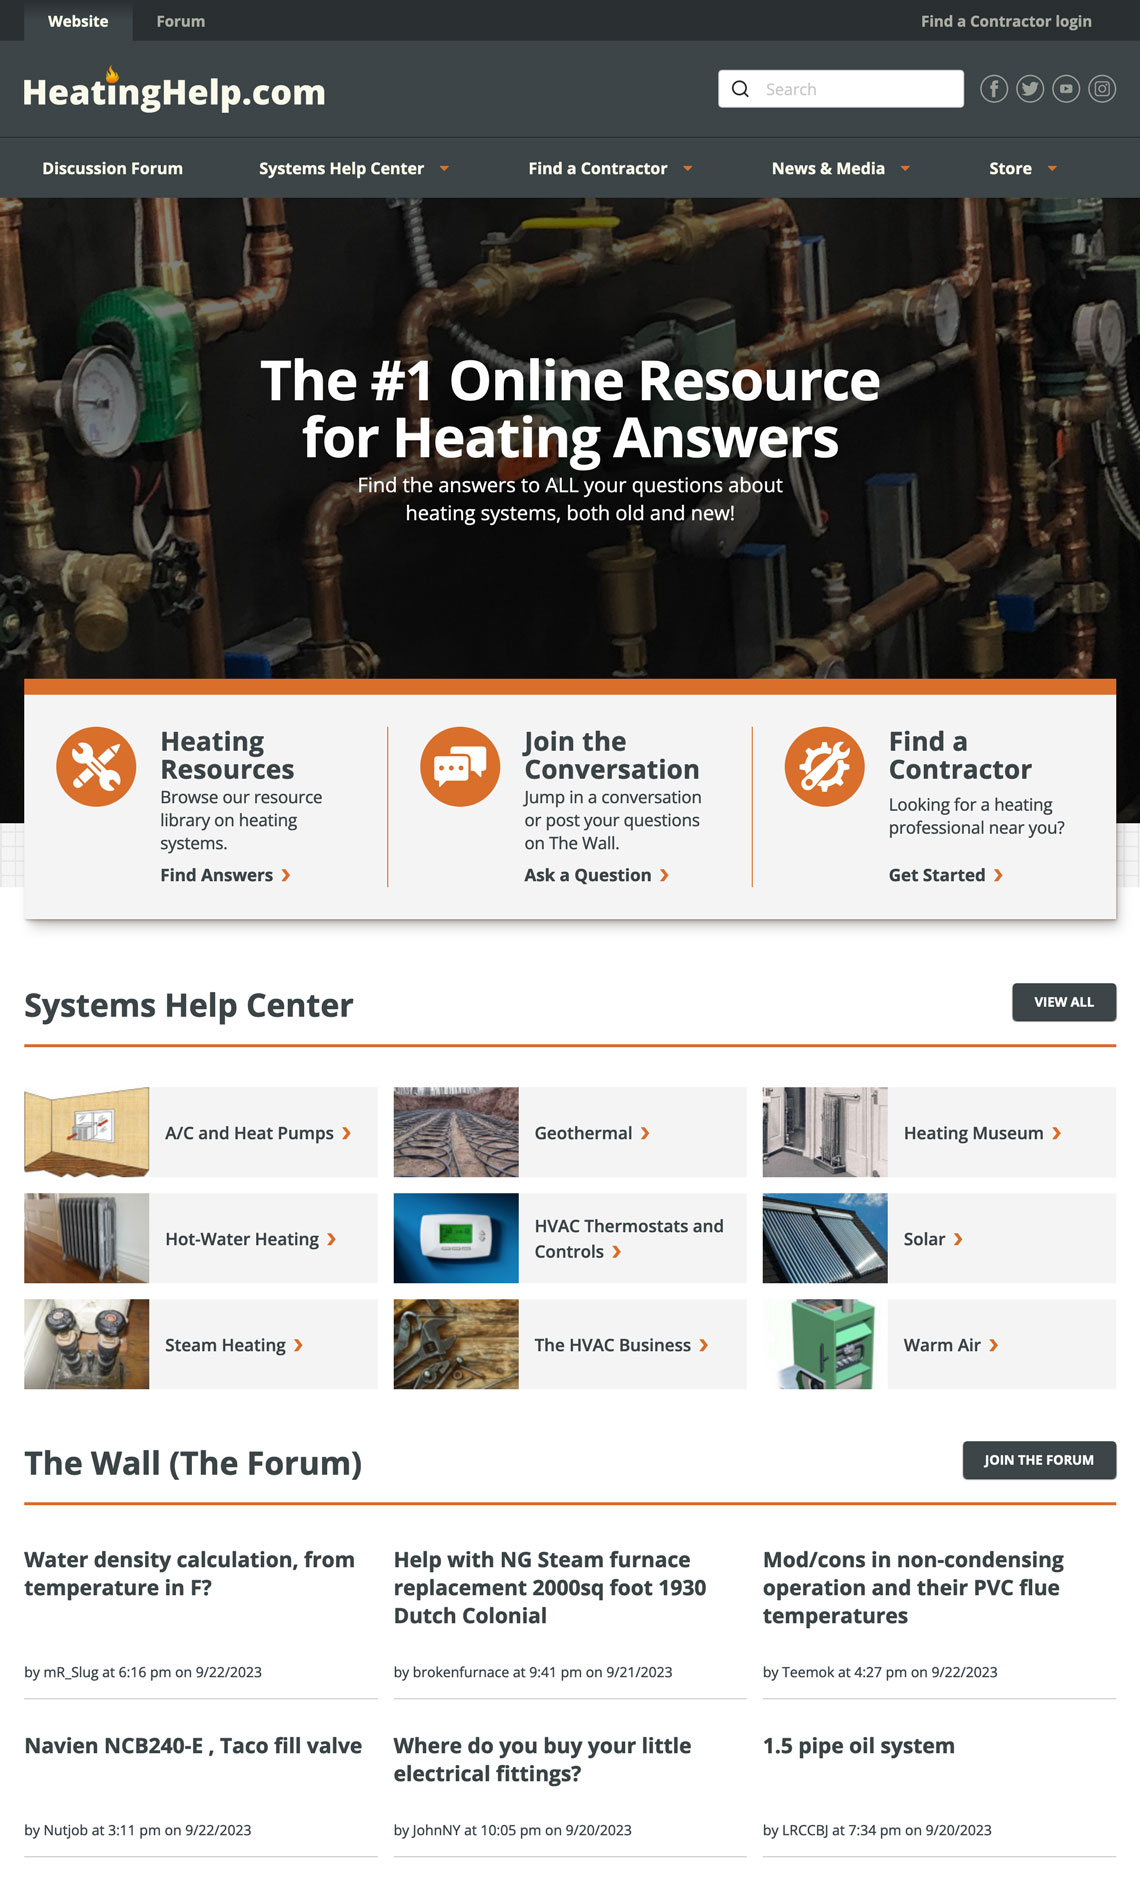 Home page of HeatingHelp with a hero that says The #1 Online Resource for Heating Answers